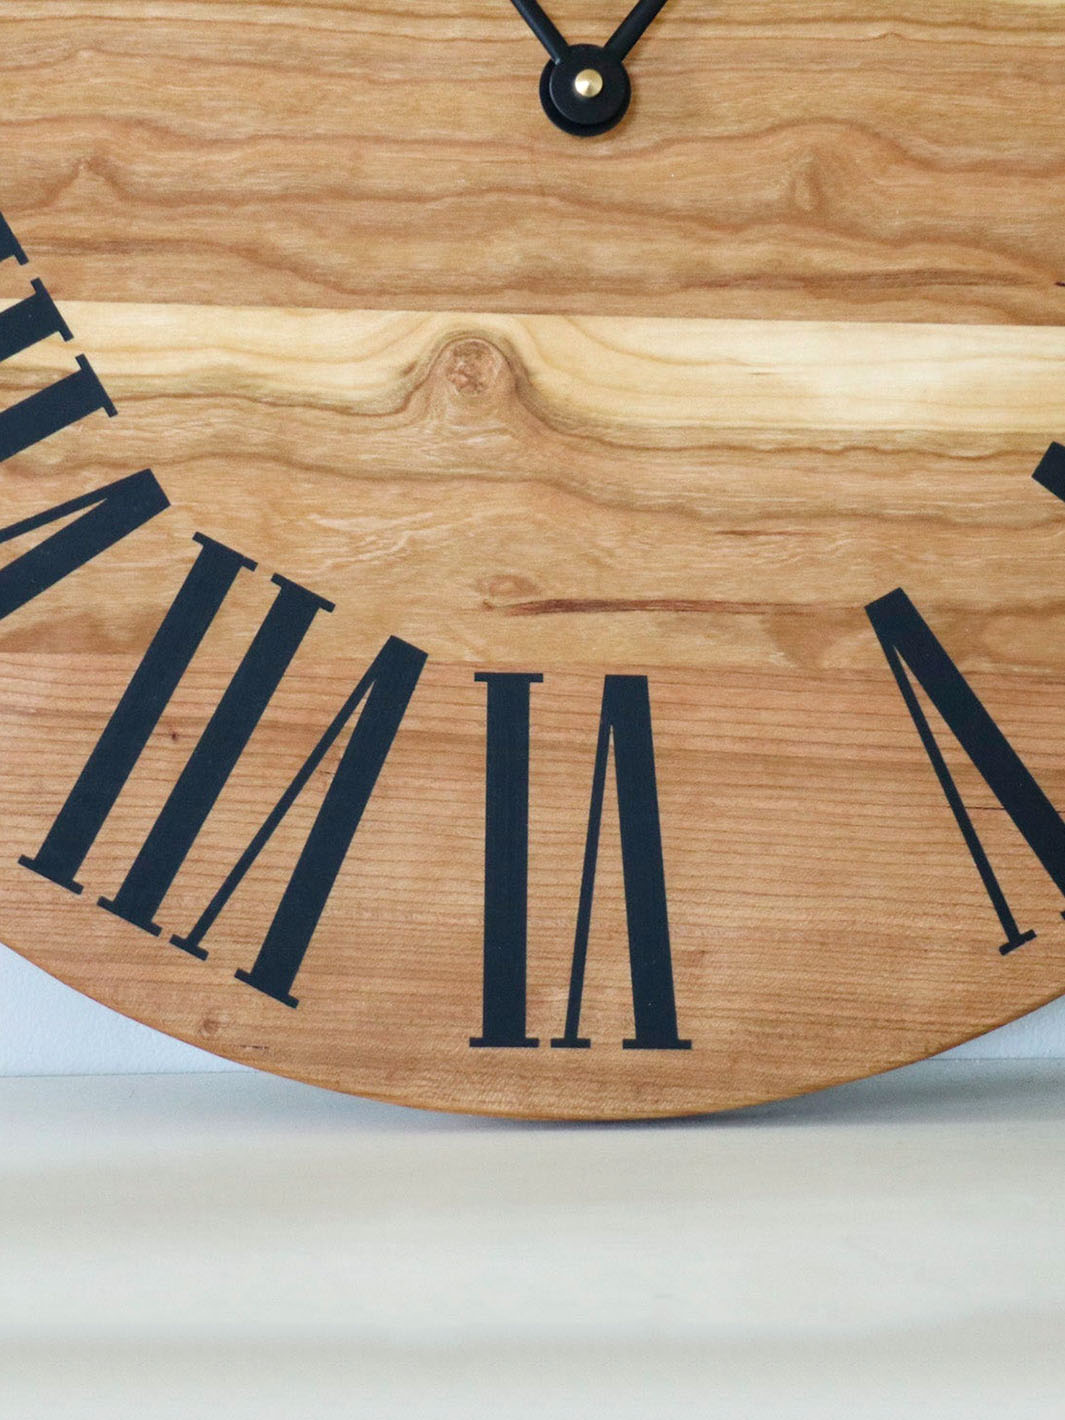 Sappy 18" Solid Cherry Hardwood Wall Clock with Black Roman Numerals (in stock) Earthly Comfort Clocks 2127-3